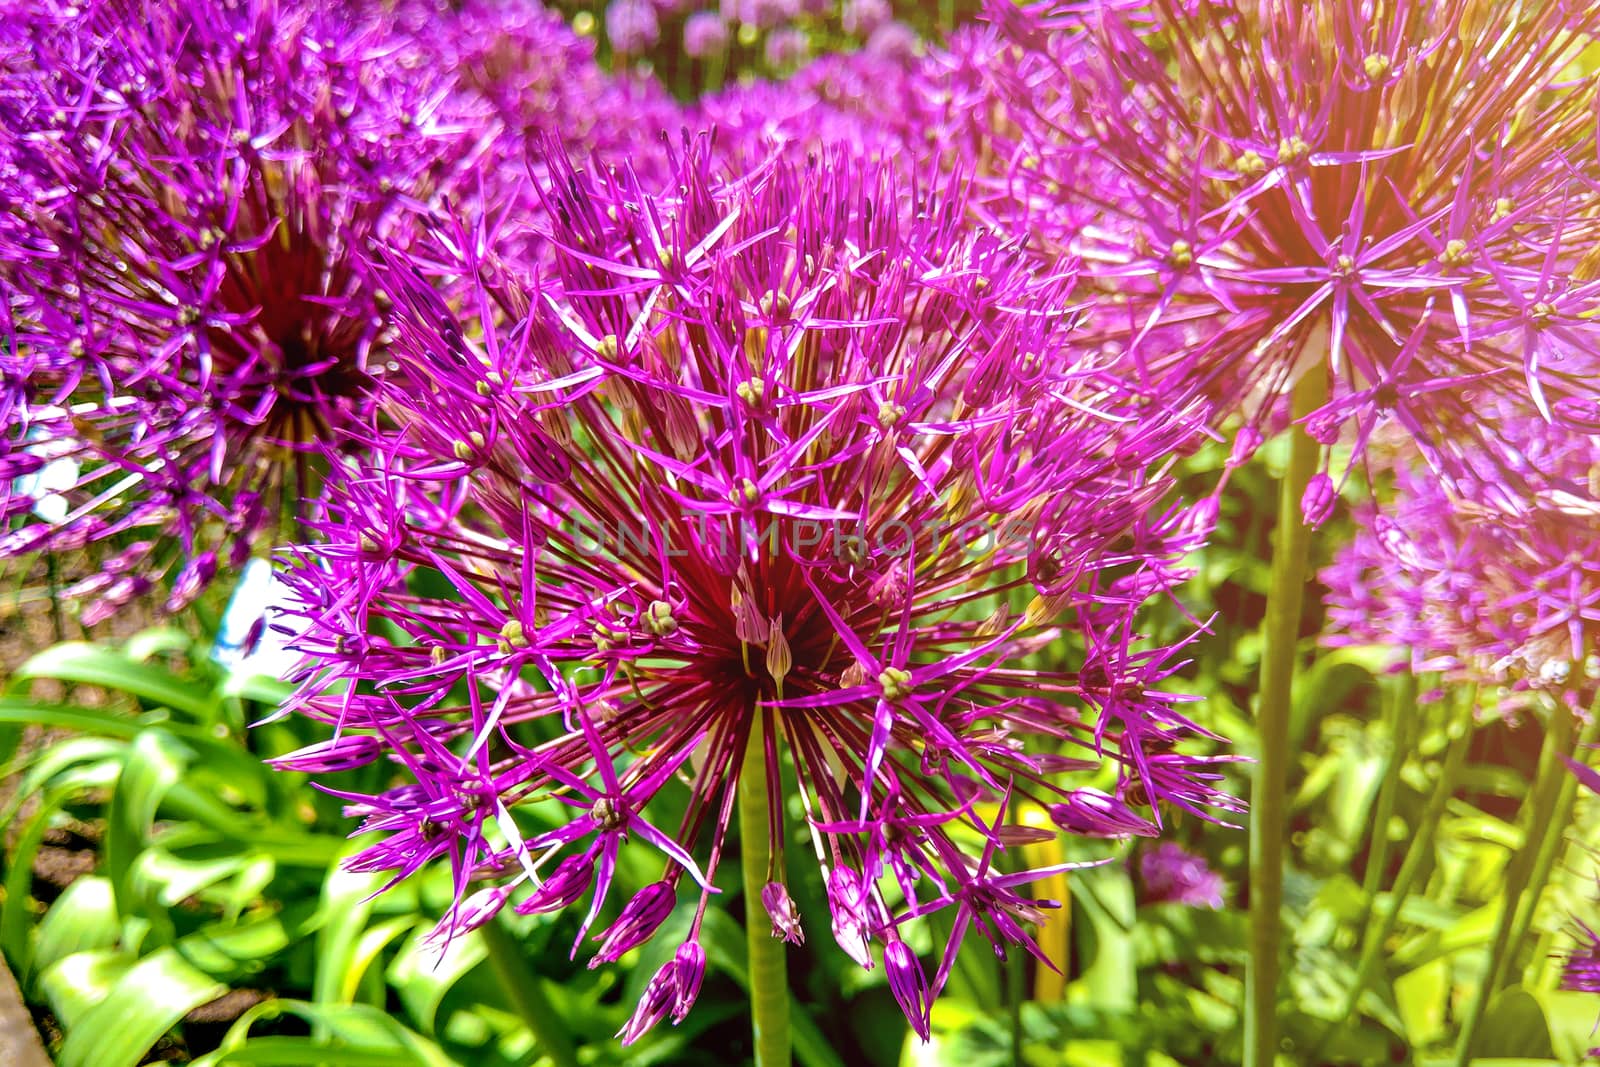 Allium Giganteum blooming. Few balls of blossoming Allium flowers. Beautiful picture with Alliums for the gardening theme